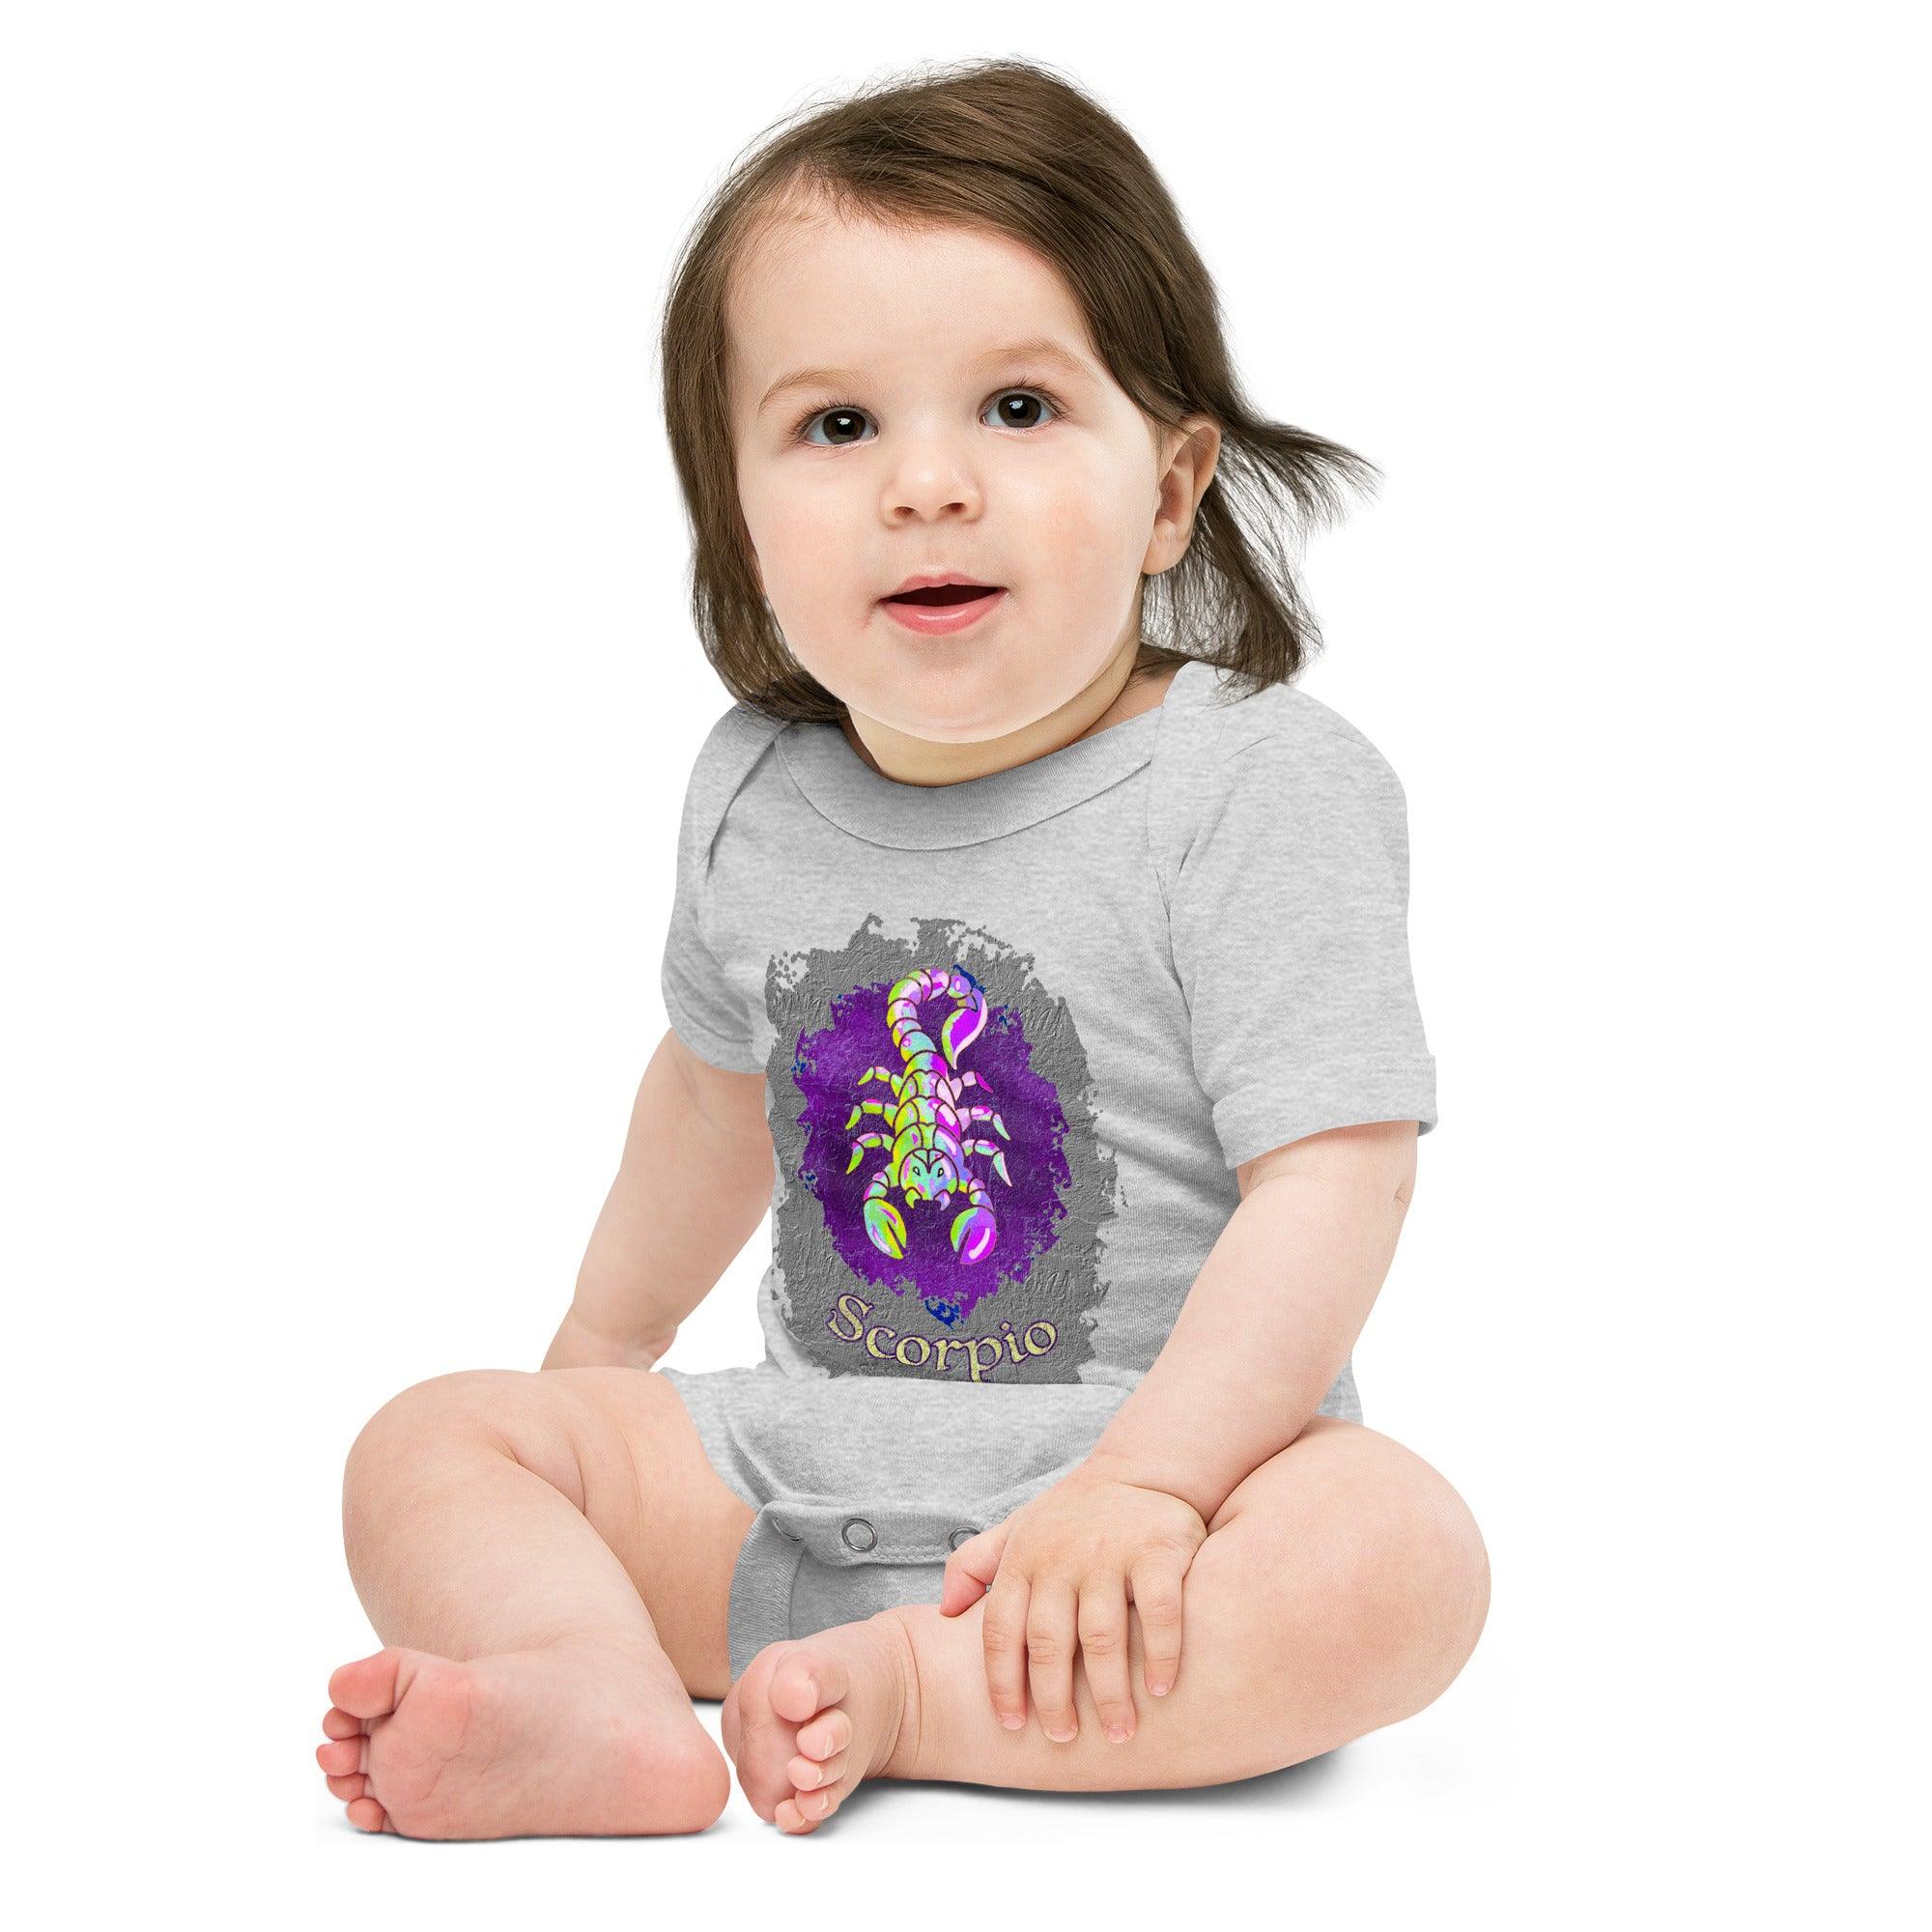 Scorpio zodiac design on baby's short sleeve one-piece outfit.